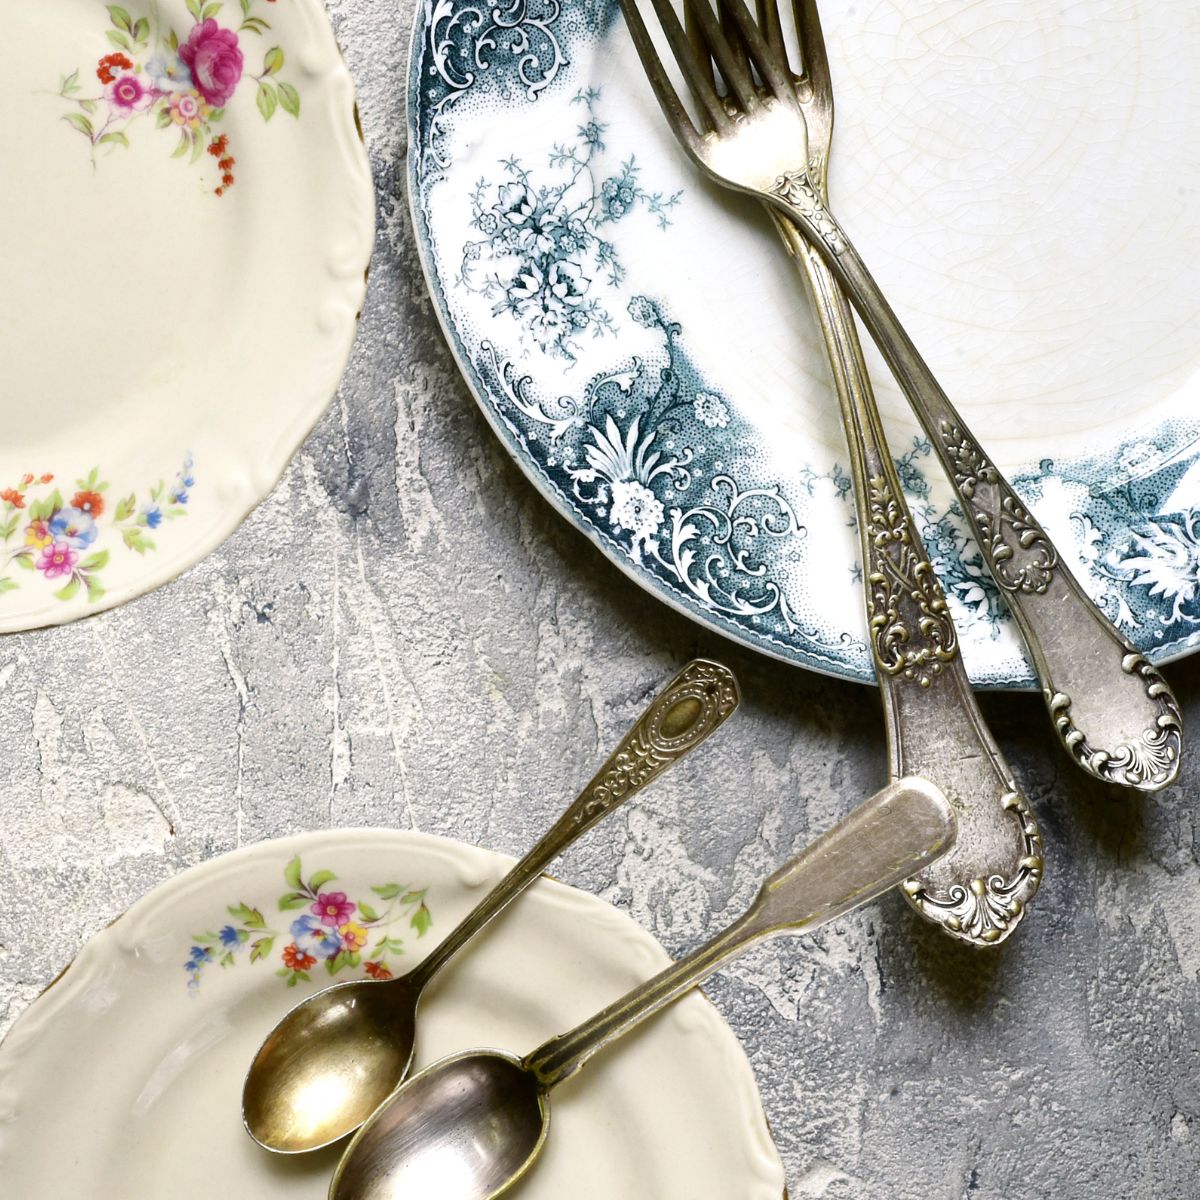 Gorgeous german plates and silverware.